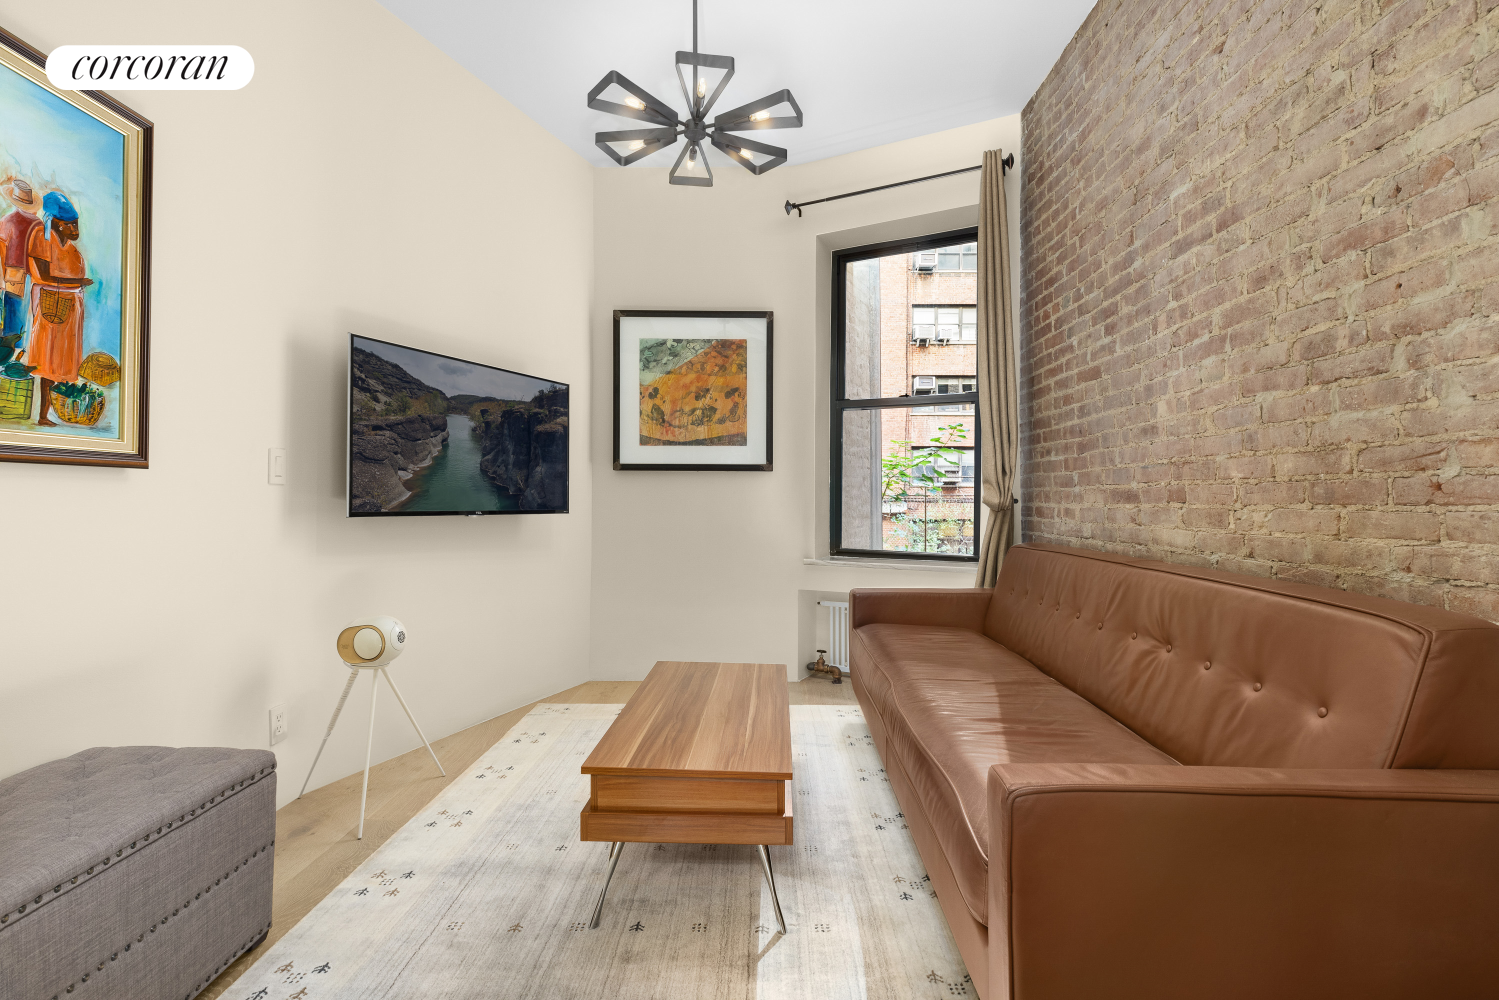 20 East 88th Street 1D, Carnegie Hill, Upper East Side, NYC - 1 Bathrooms  
2 Rooms - 